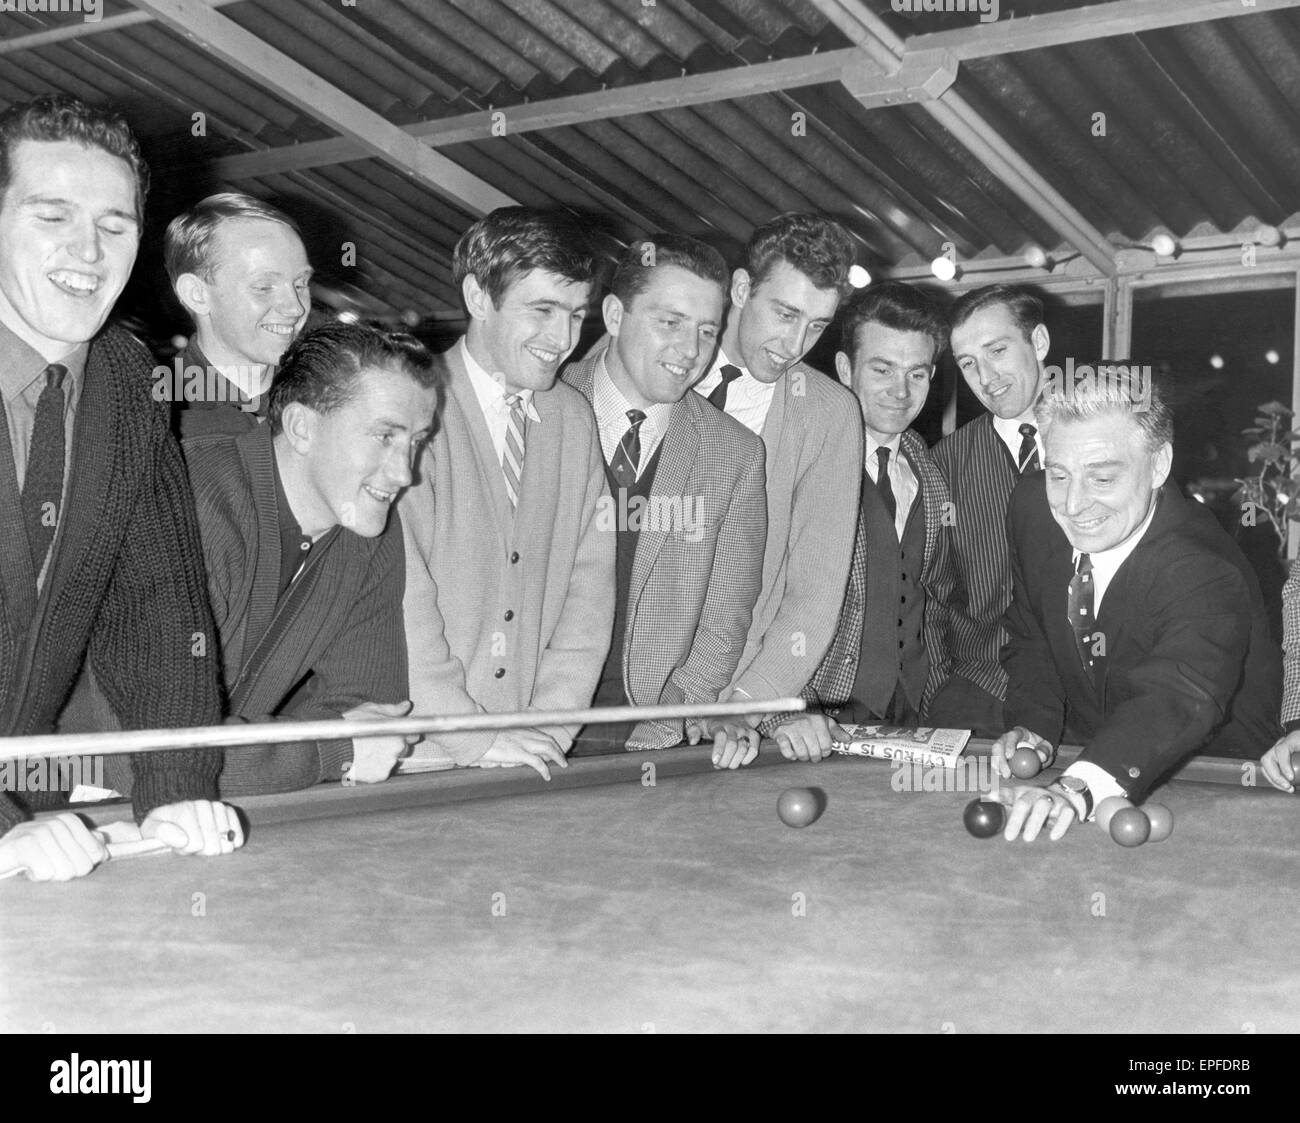 Southampton FC players and manager at Ocean Hotel, Brighton, Monday 30th December 1963. Manager, Ted Bates, talkes tactics with billiard balls. The players are T Paine, T Traynor, J Sydmean, T Godfrey, M Chivers, C Auxford, R Davies, the manager Ted Bates Stock Photo